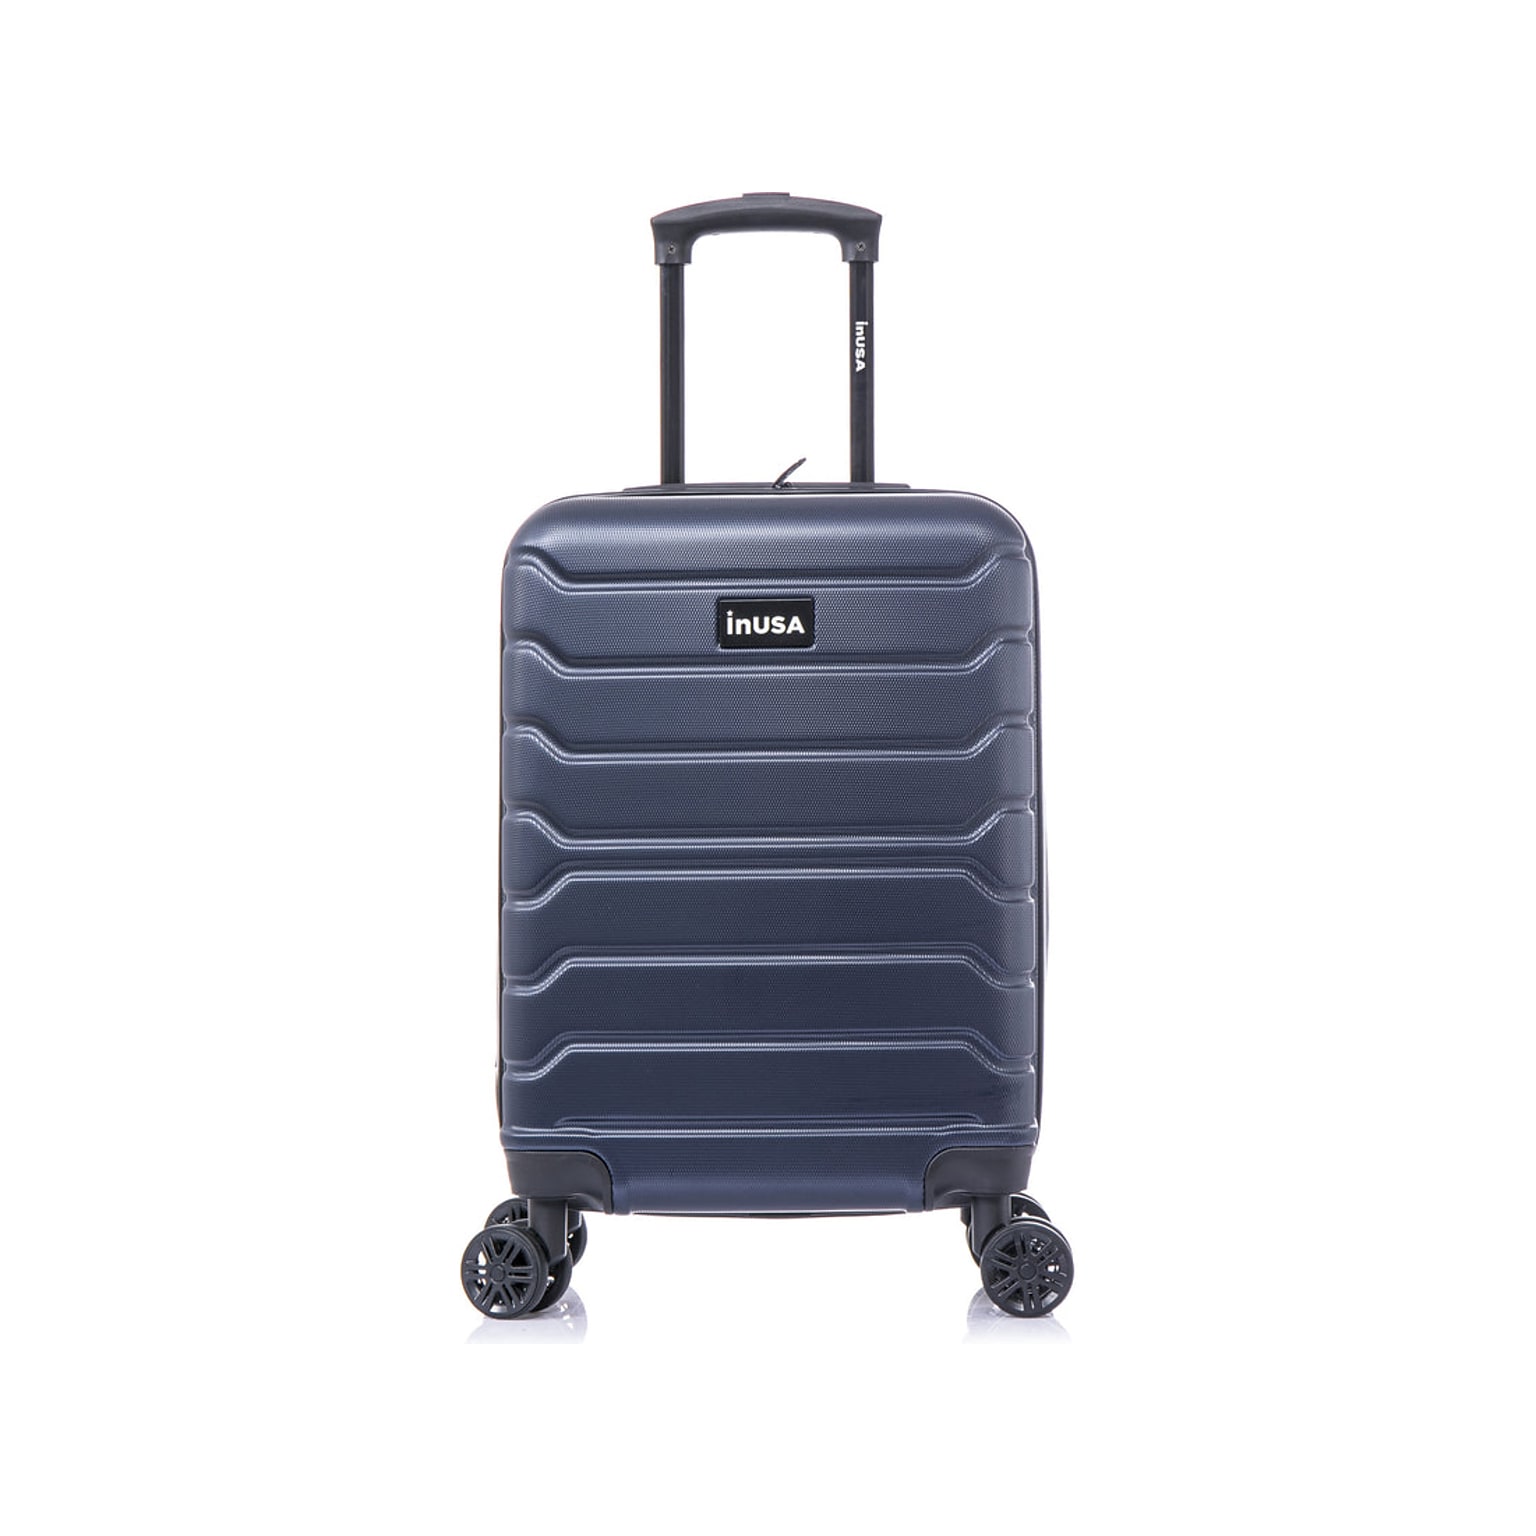 InUSA Trend 20.5 Hardside Carry-On Suitcase, 4-Wheeled Spinner, Blue (IUTRE00S-BLU)